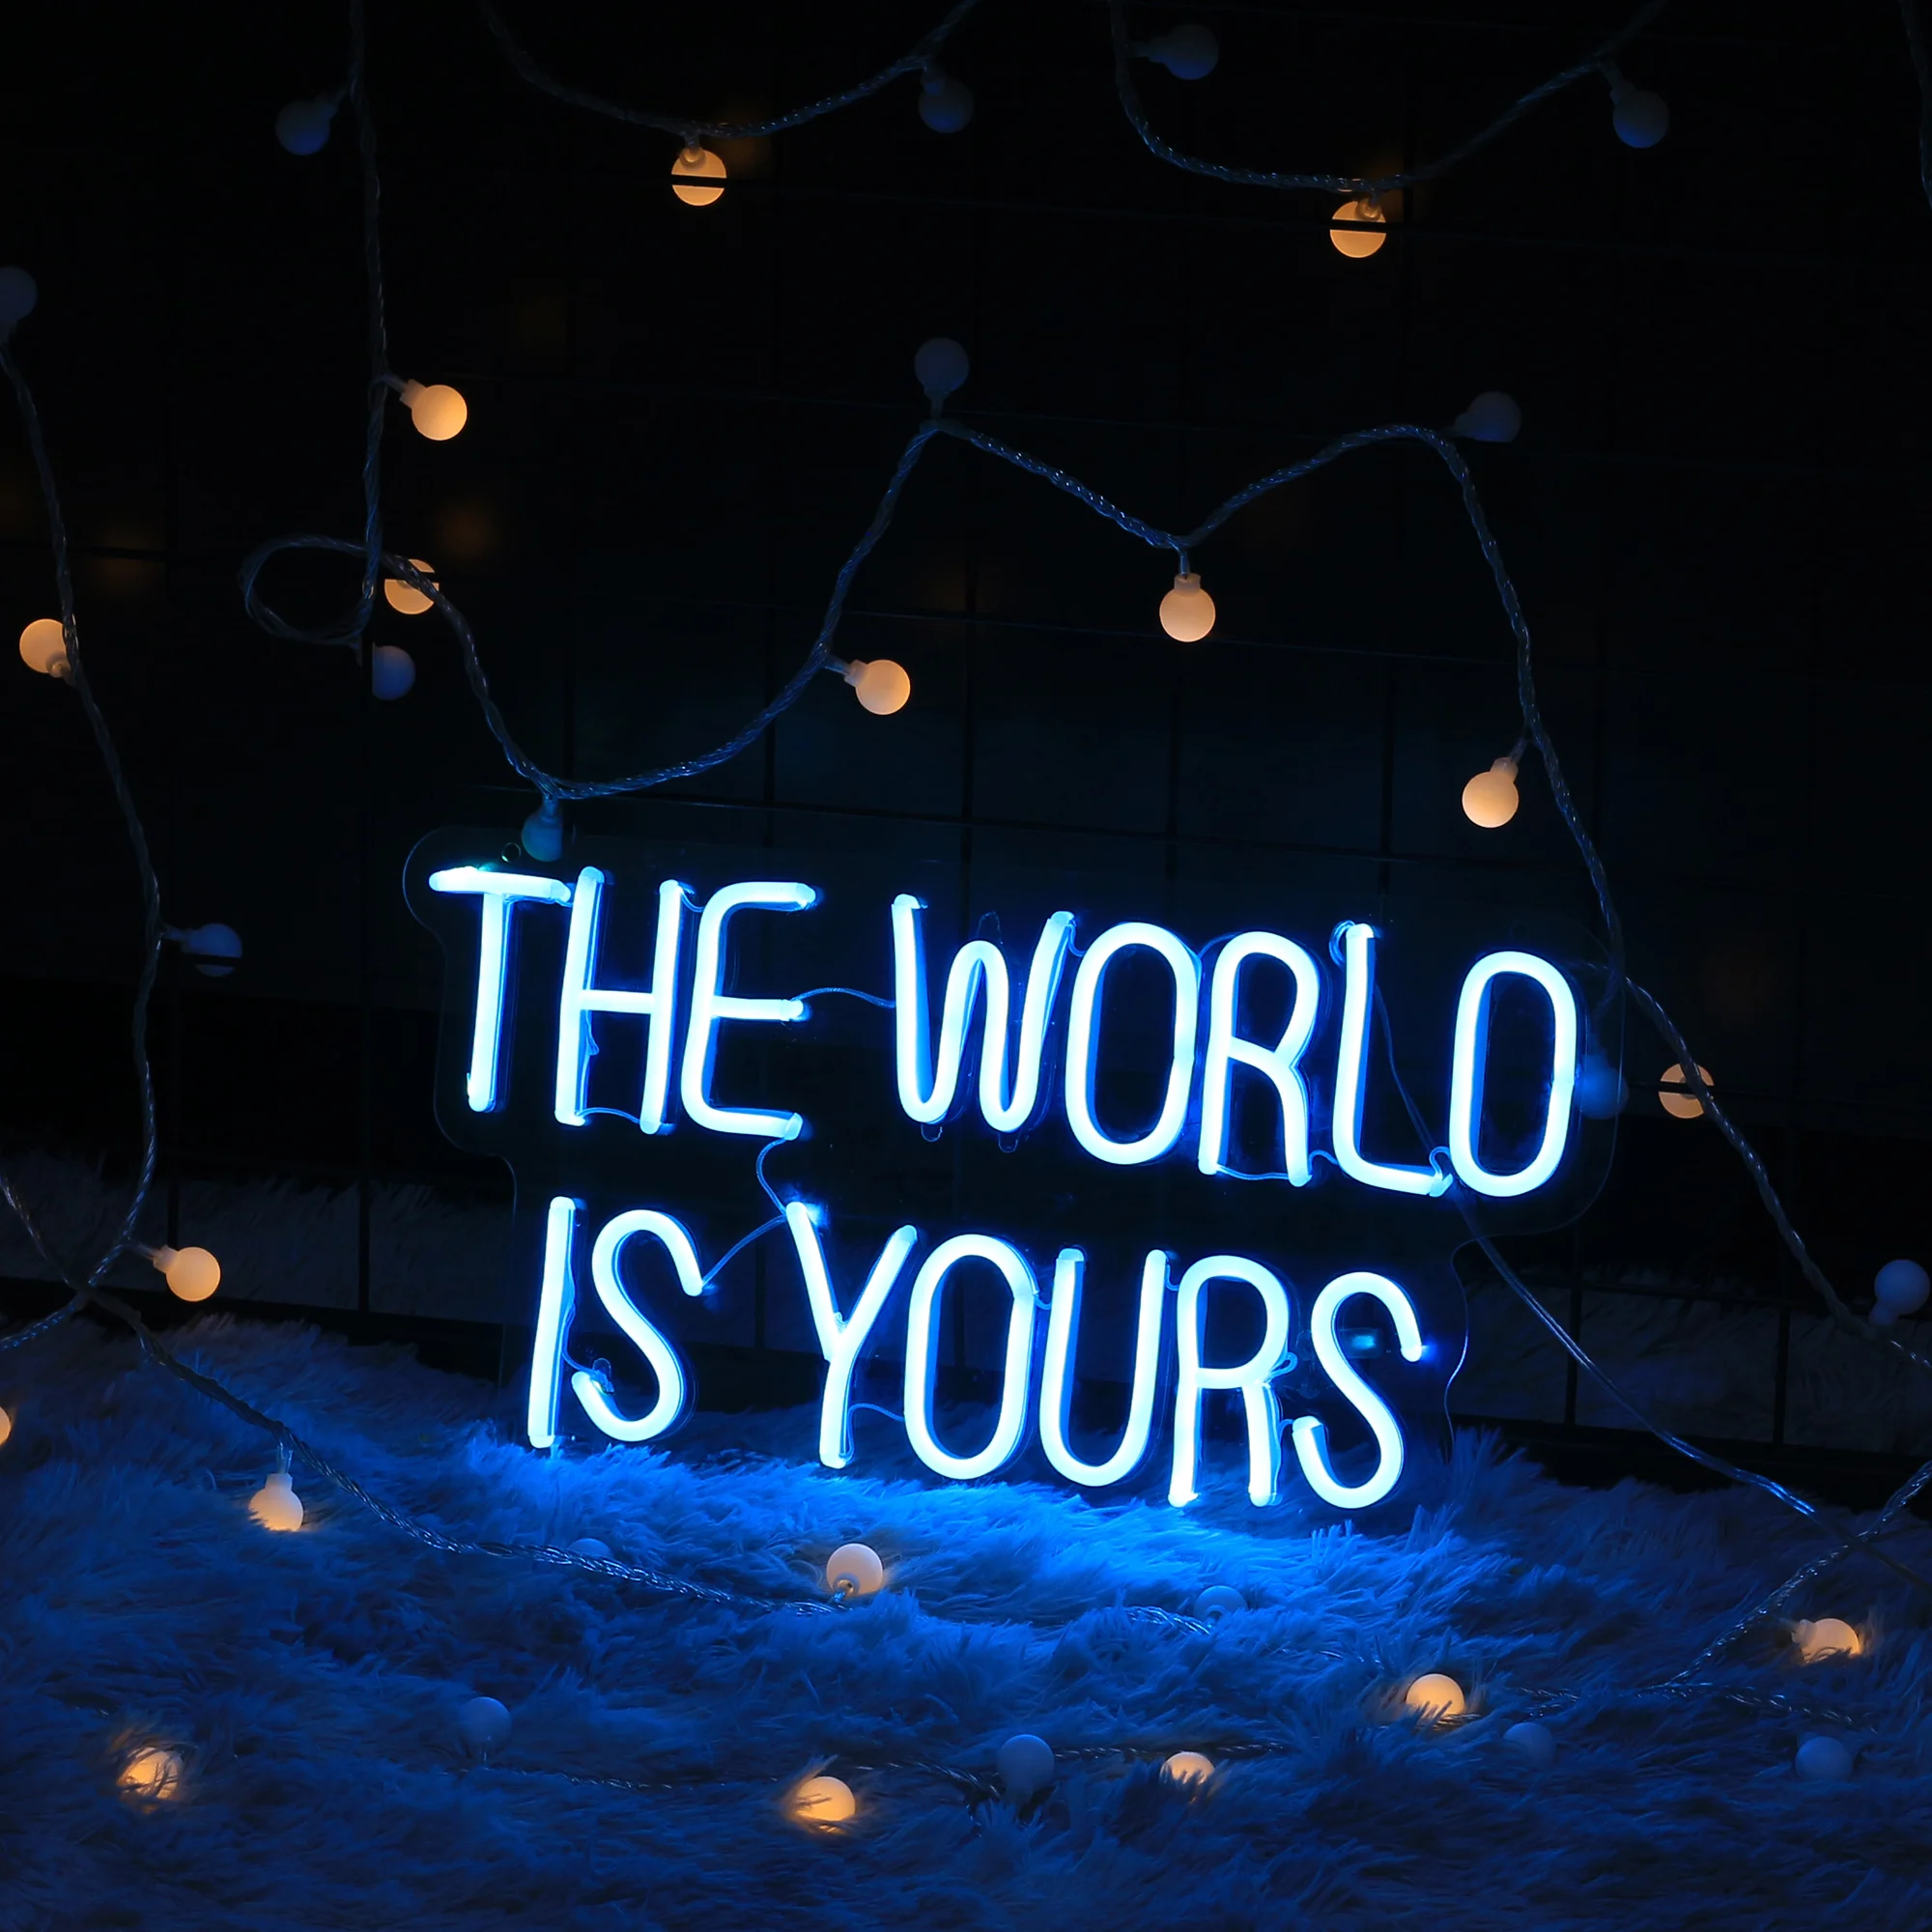 

The World Is Yours Neon Signs Light Flex Neon Birthday Party Game Room Bar Shop Logo Pub Store Club Nightclub Decor Made Wall